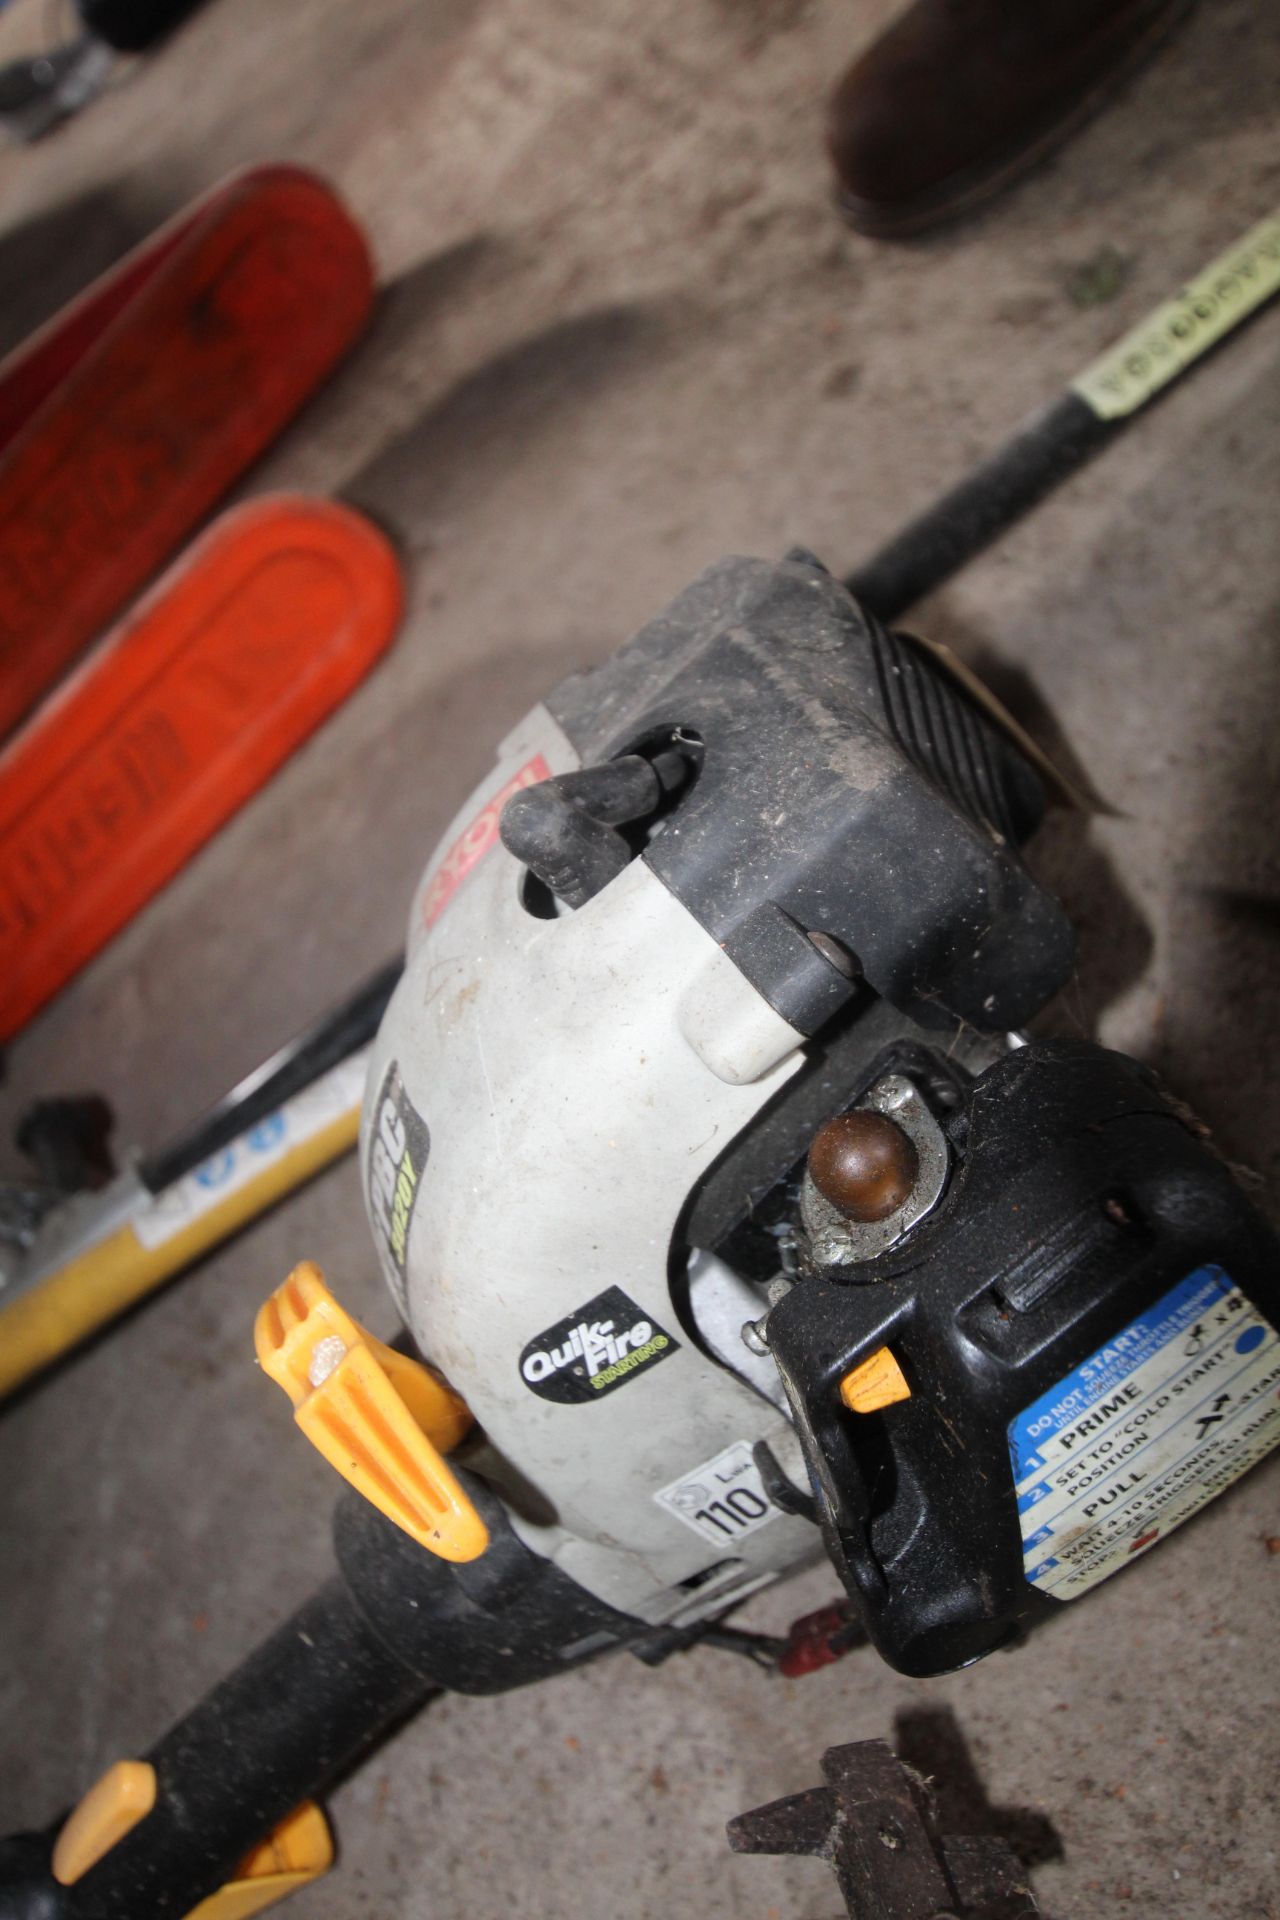 Ryobi petrol driven multi tool with hedge cutter and strimmer heads. - Image 3 of 4